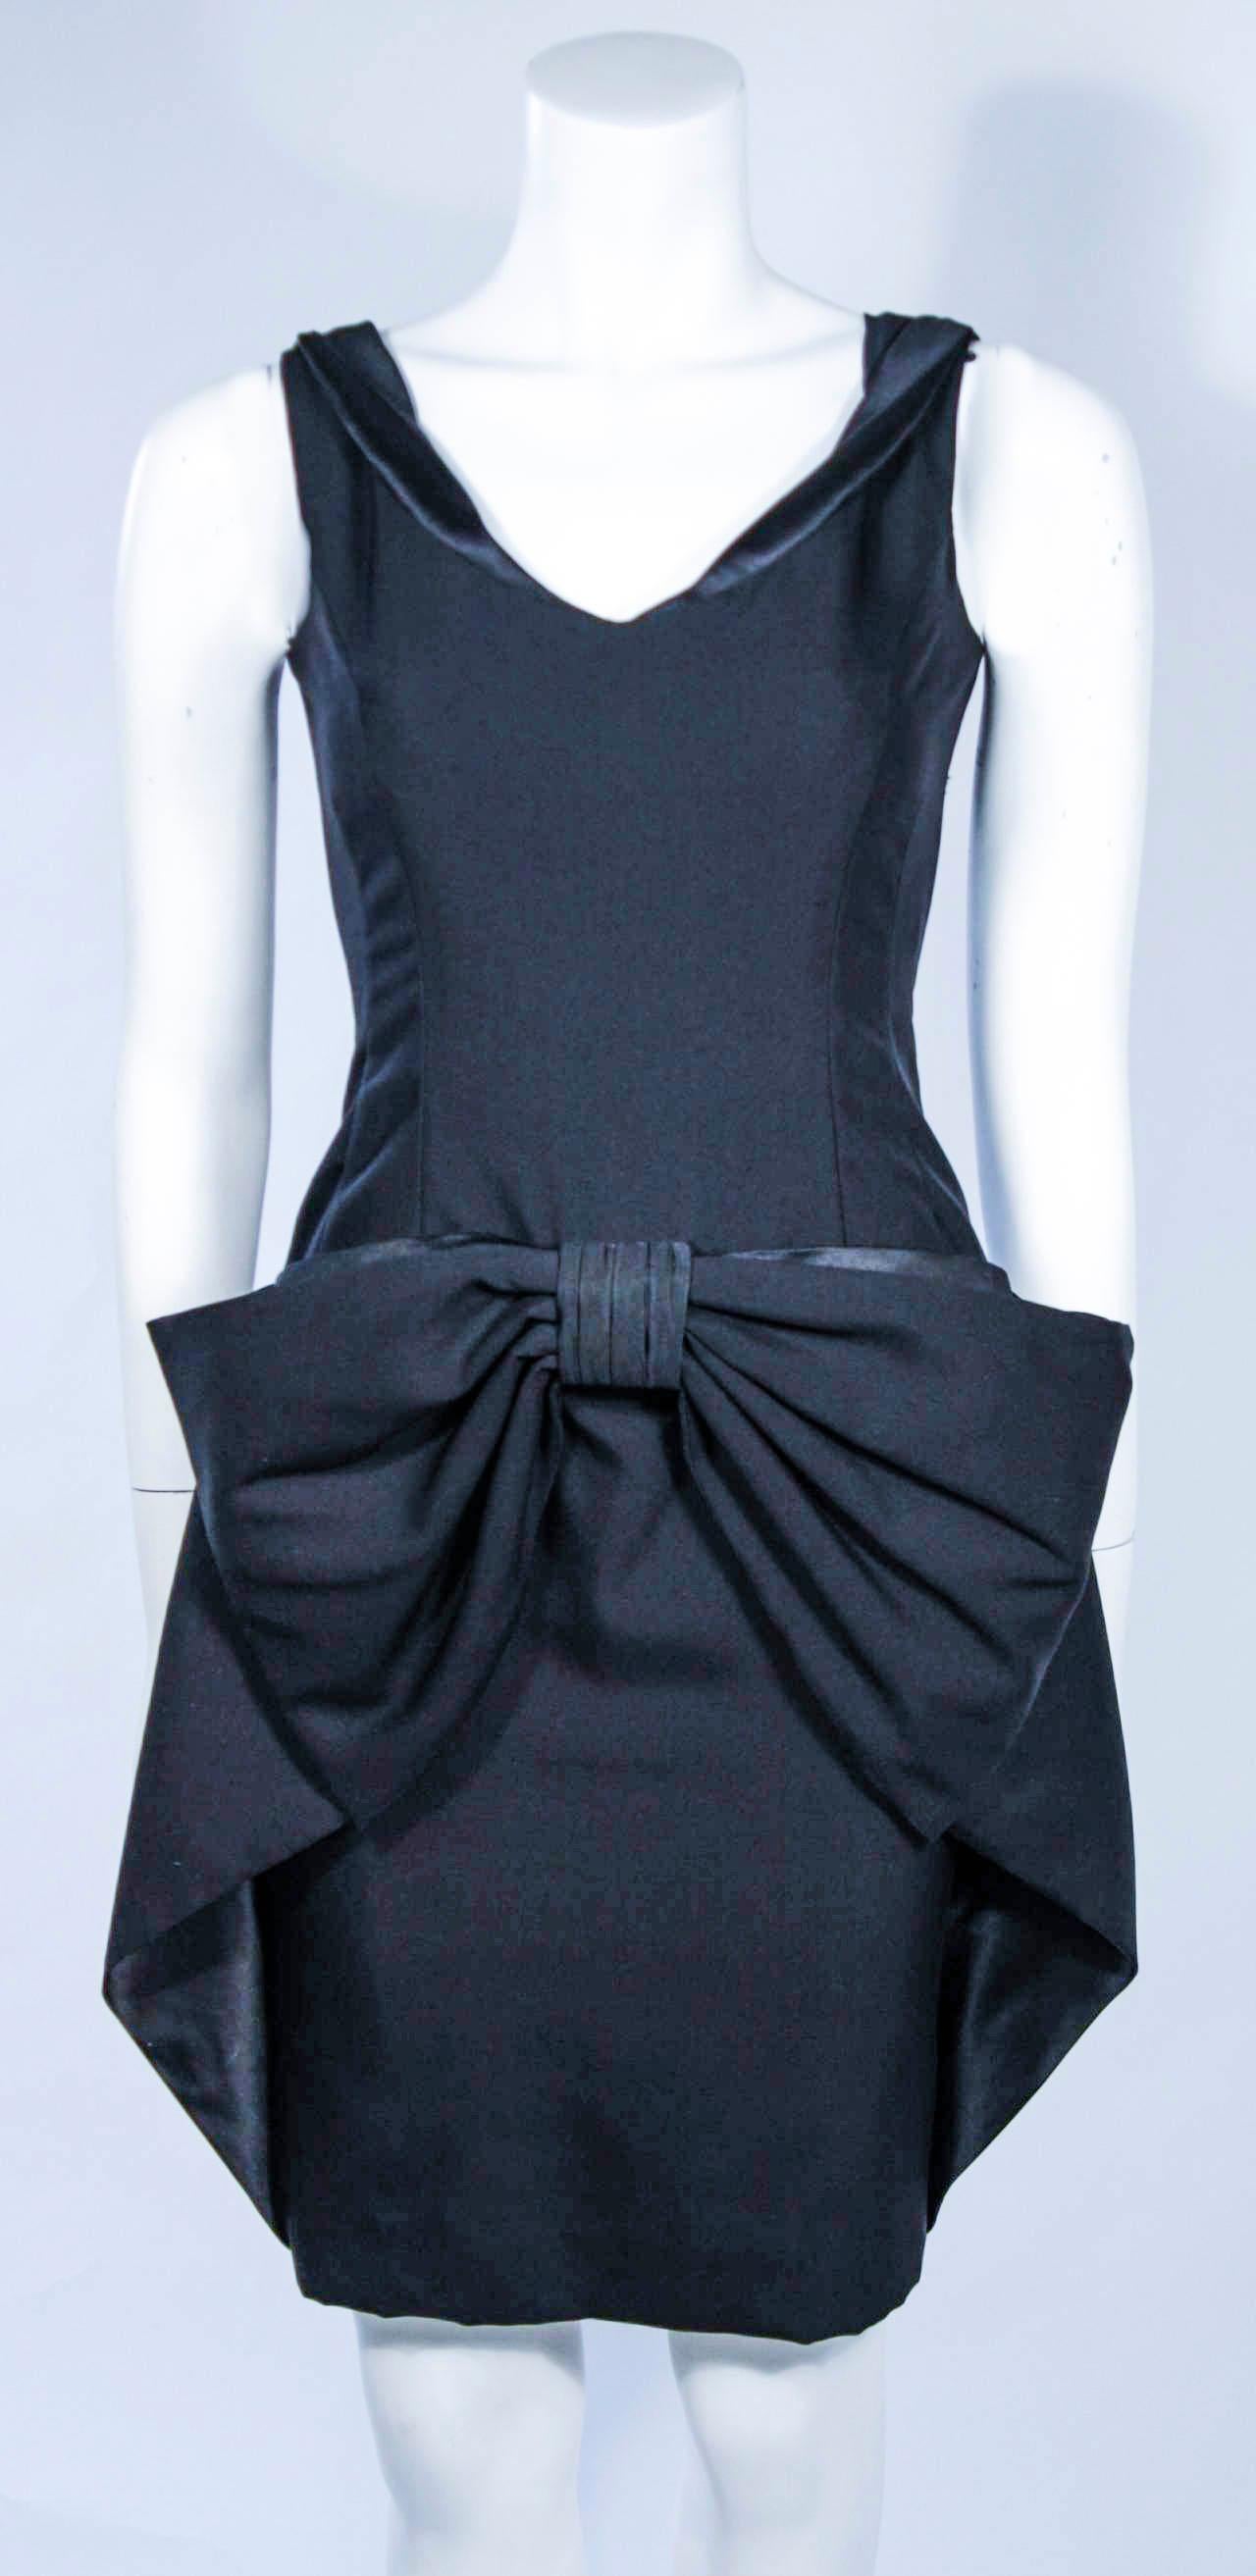 Fashioned from the finest black silk dupioni and accented with silk charmeuse, this sleeveless cocktail features a draped bow concealing pockets.

This is a couture custom order and is available in a variety of fine silks, suitable to your personal